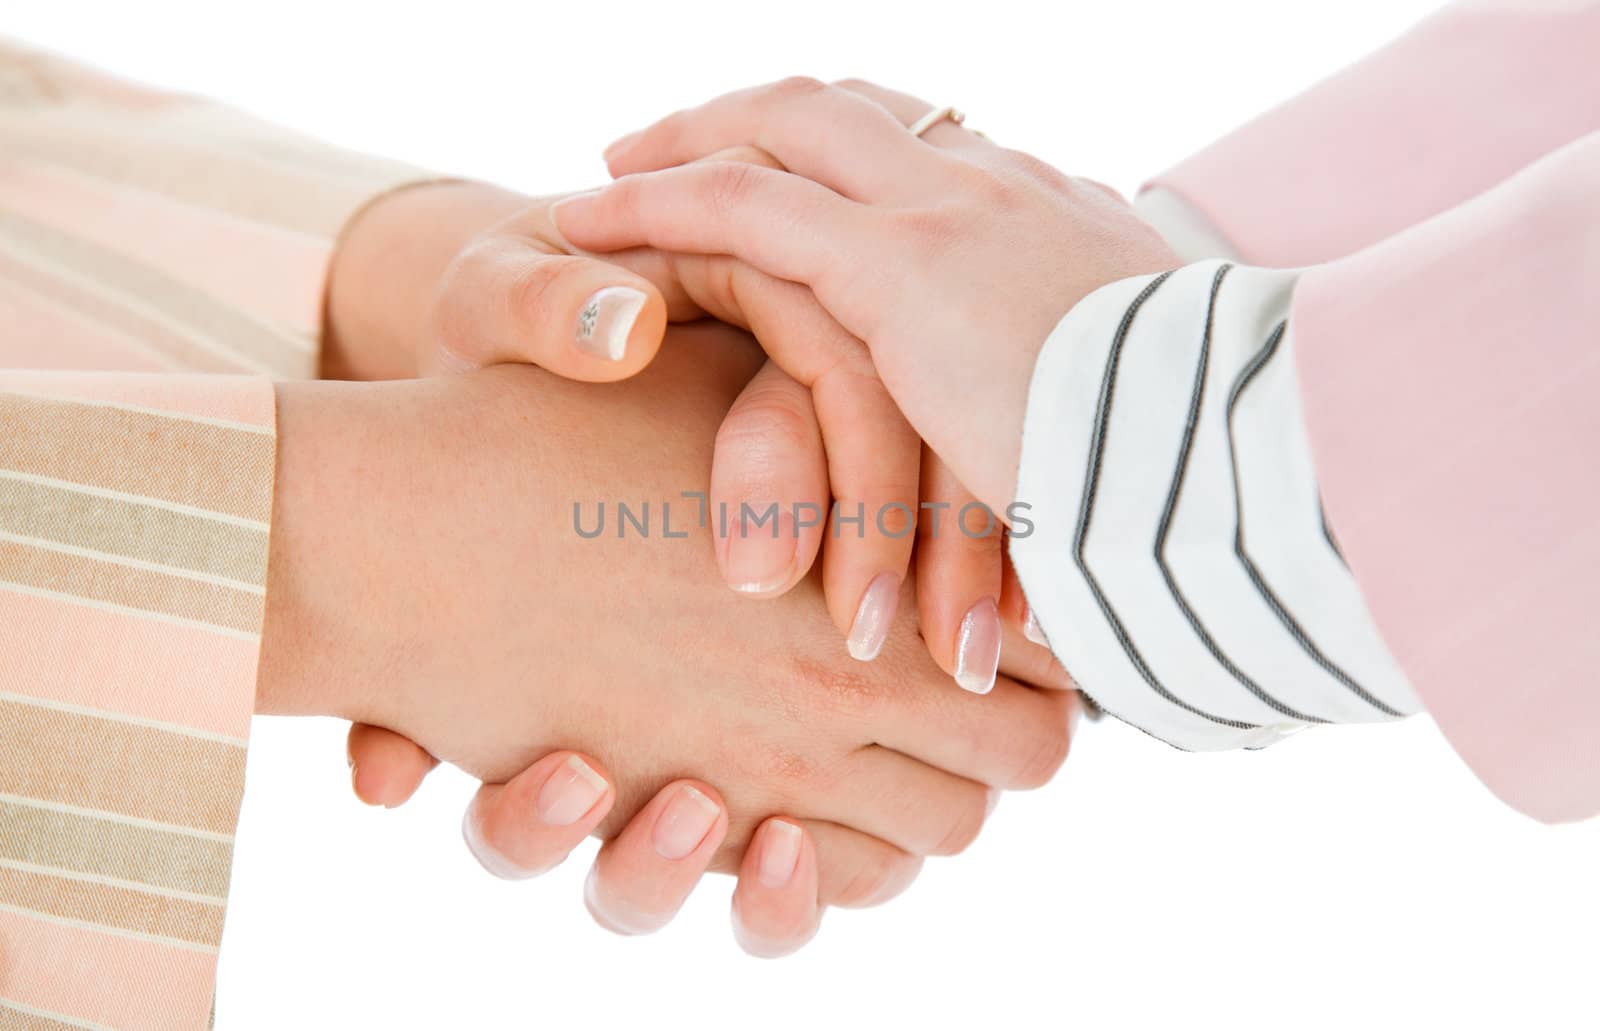 Close-up of four female handshaking hands, isolated on white